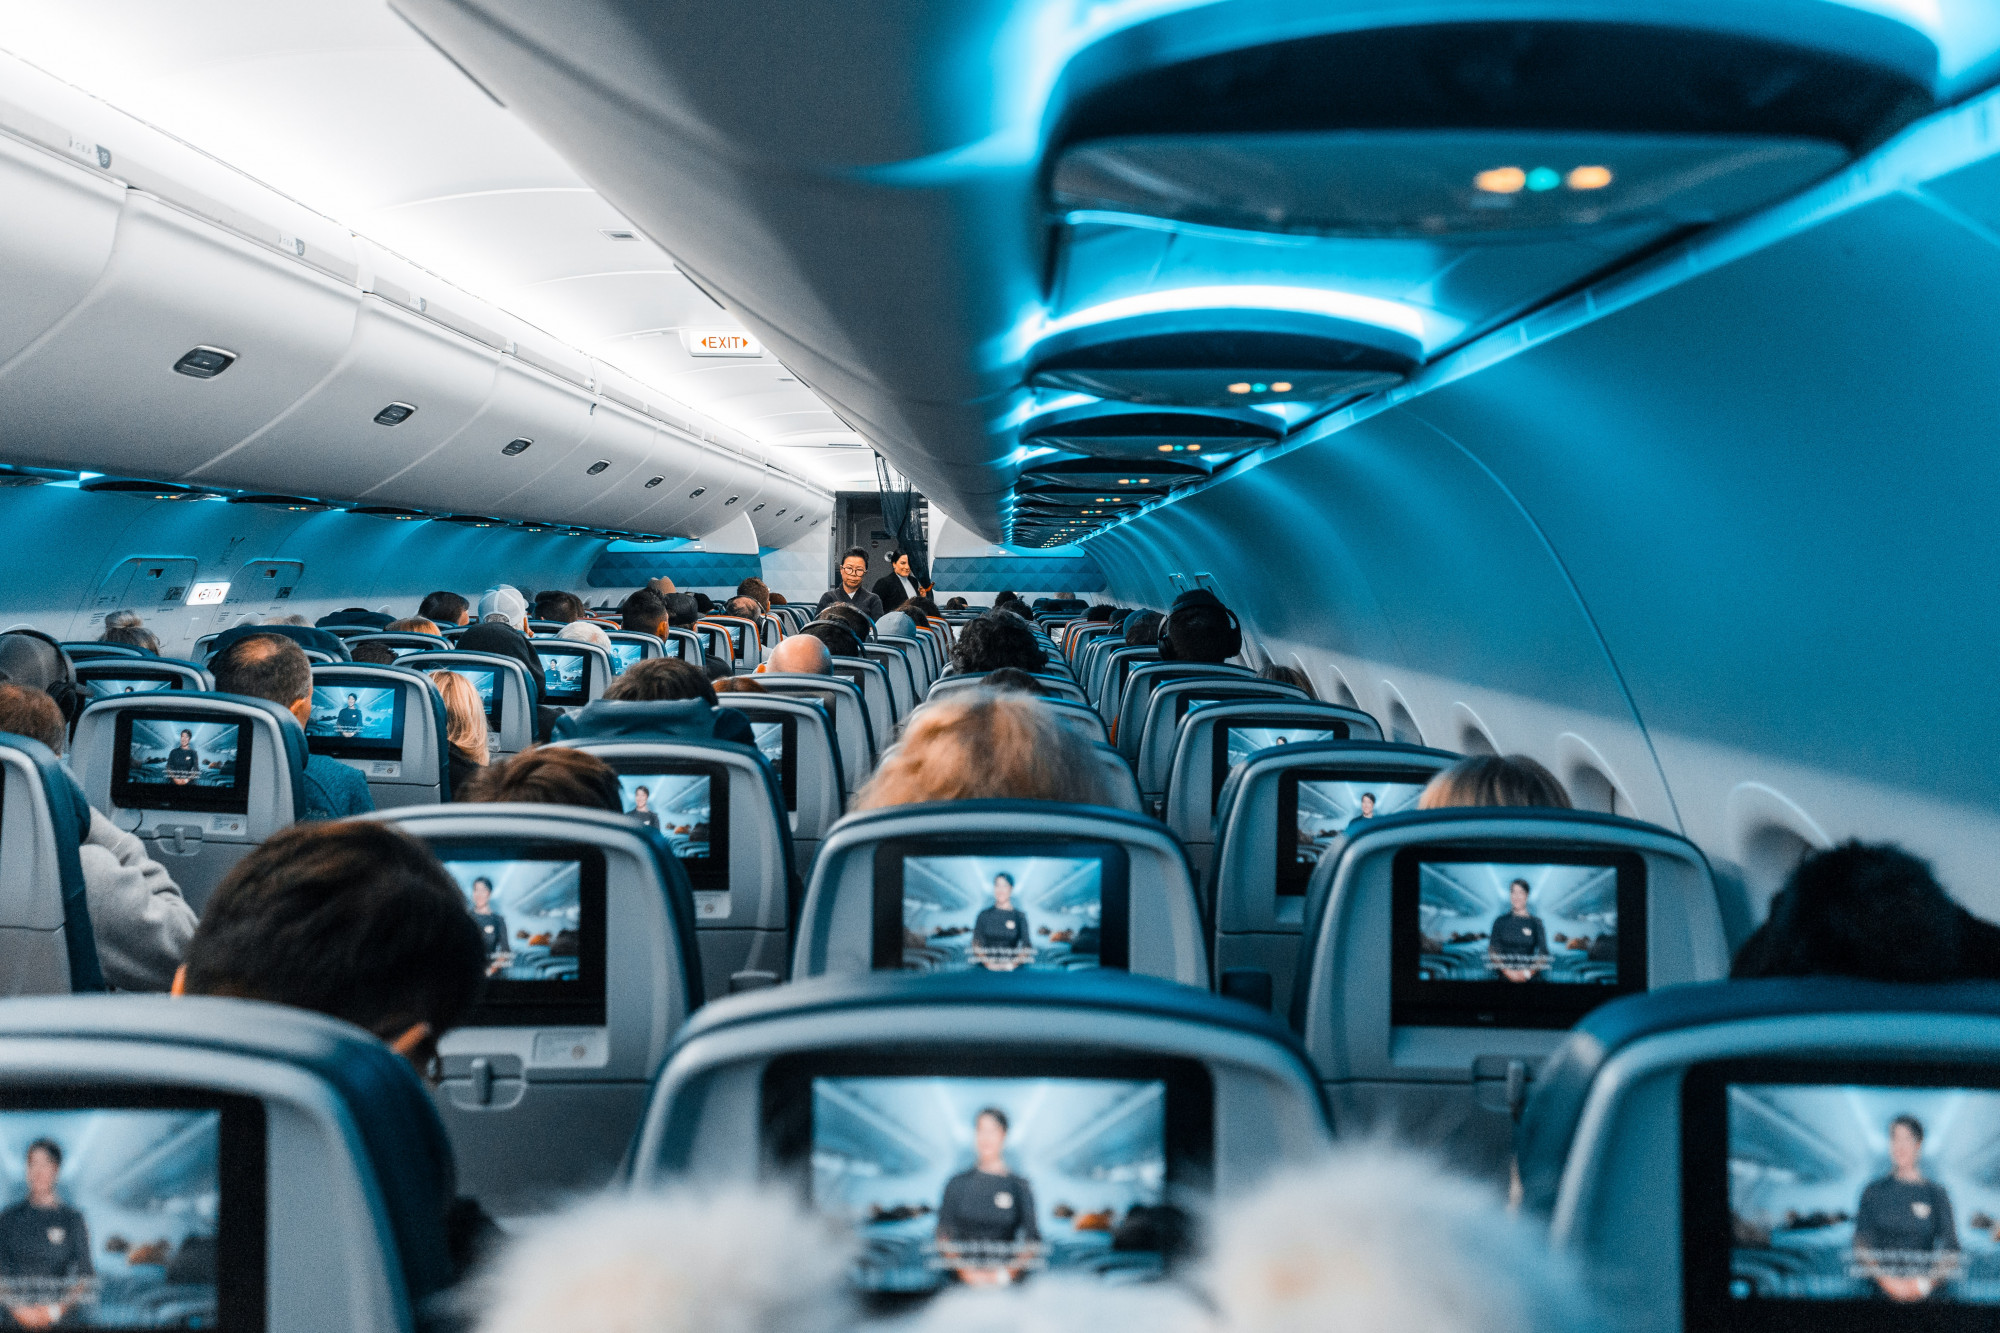 A picture of the inside of a full plane, with blue decor, as passengers watch a safety message.